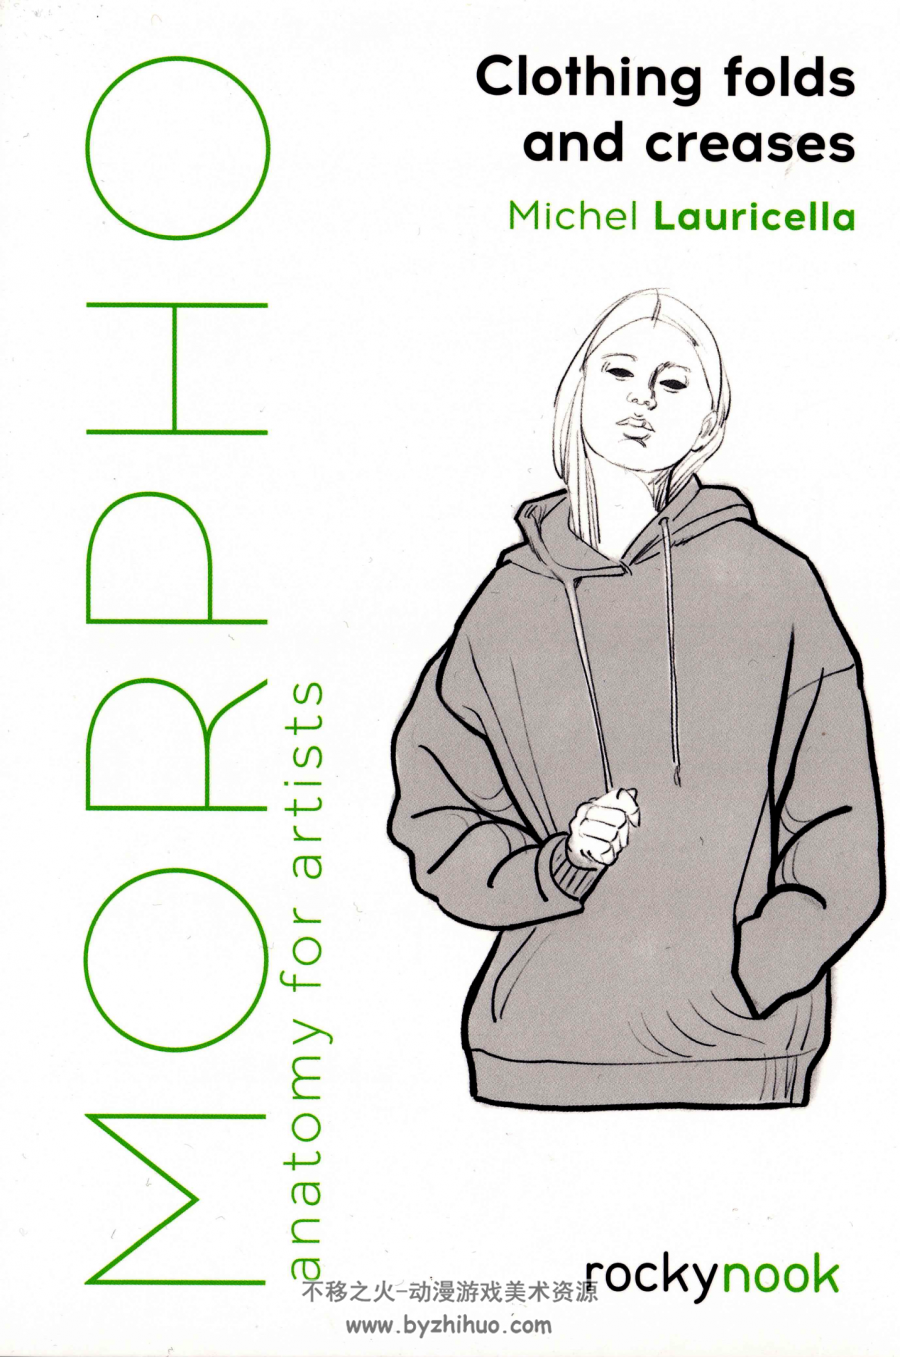 Morpho Clothing Folds and Creases 英文版 电子书 100P